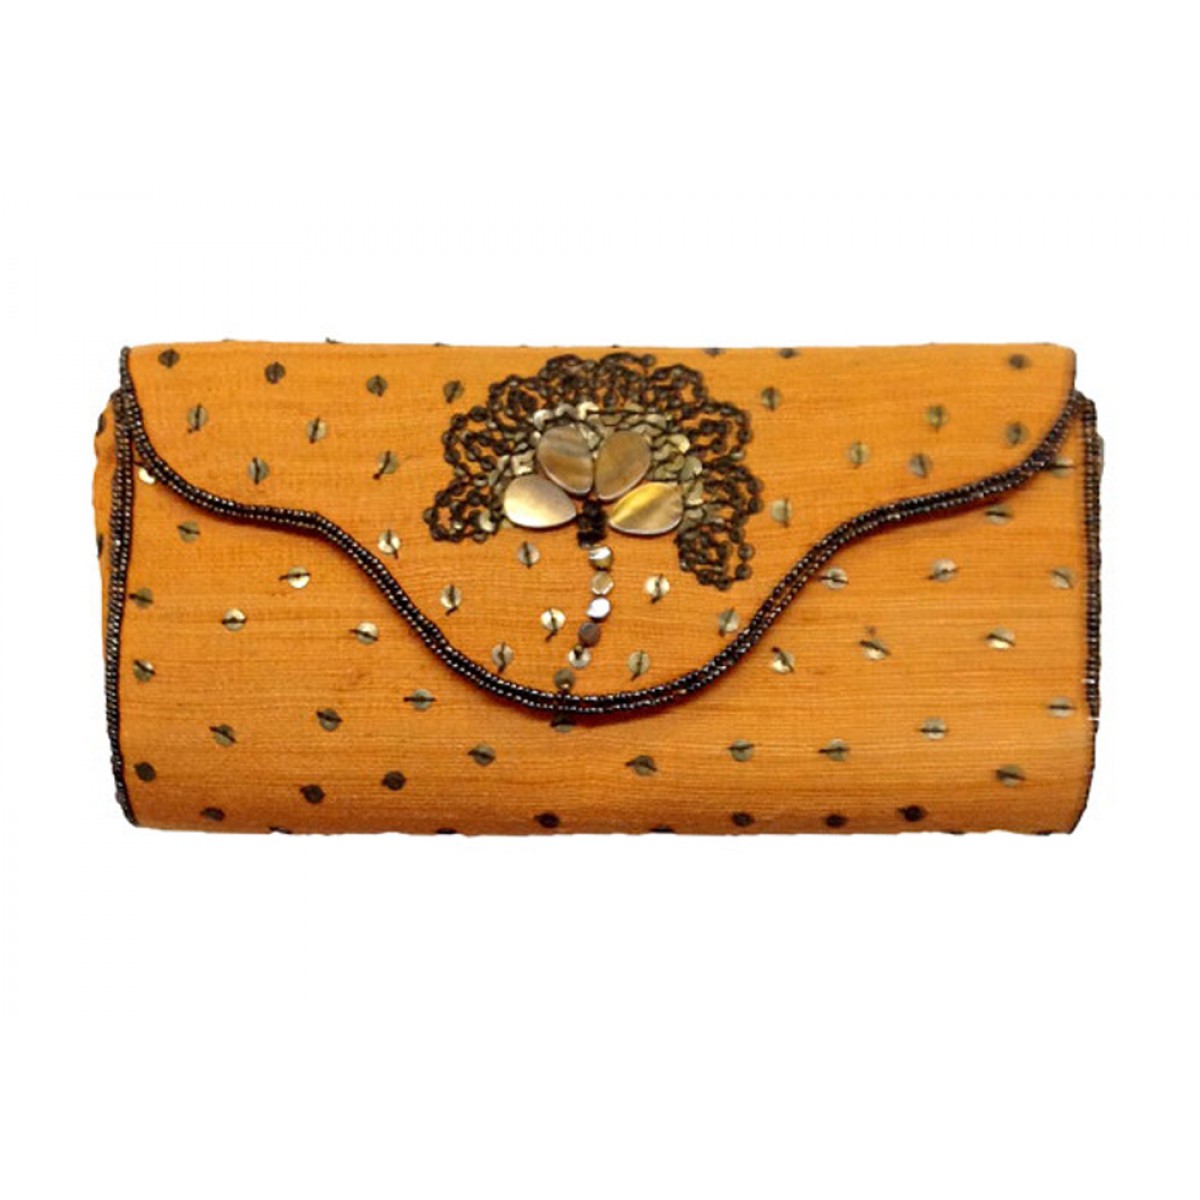 Purse with Flower Motif